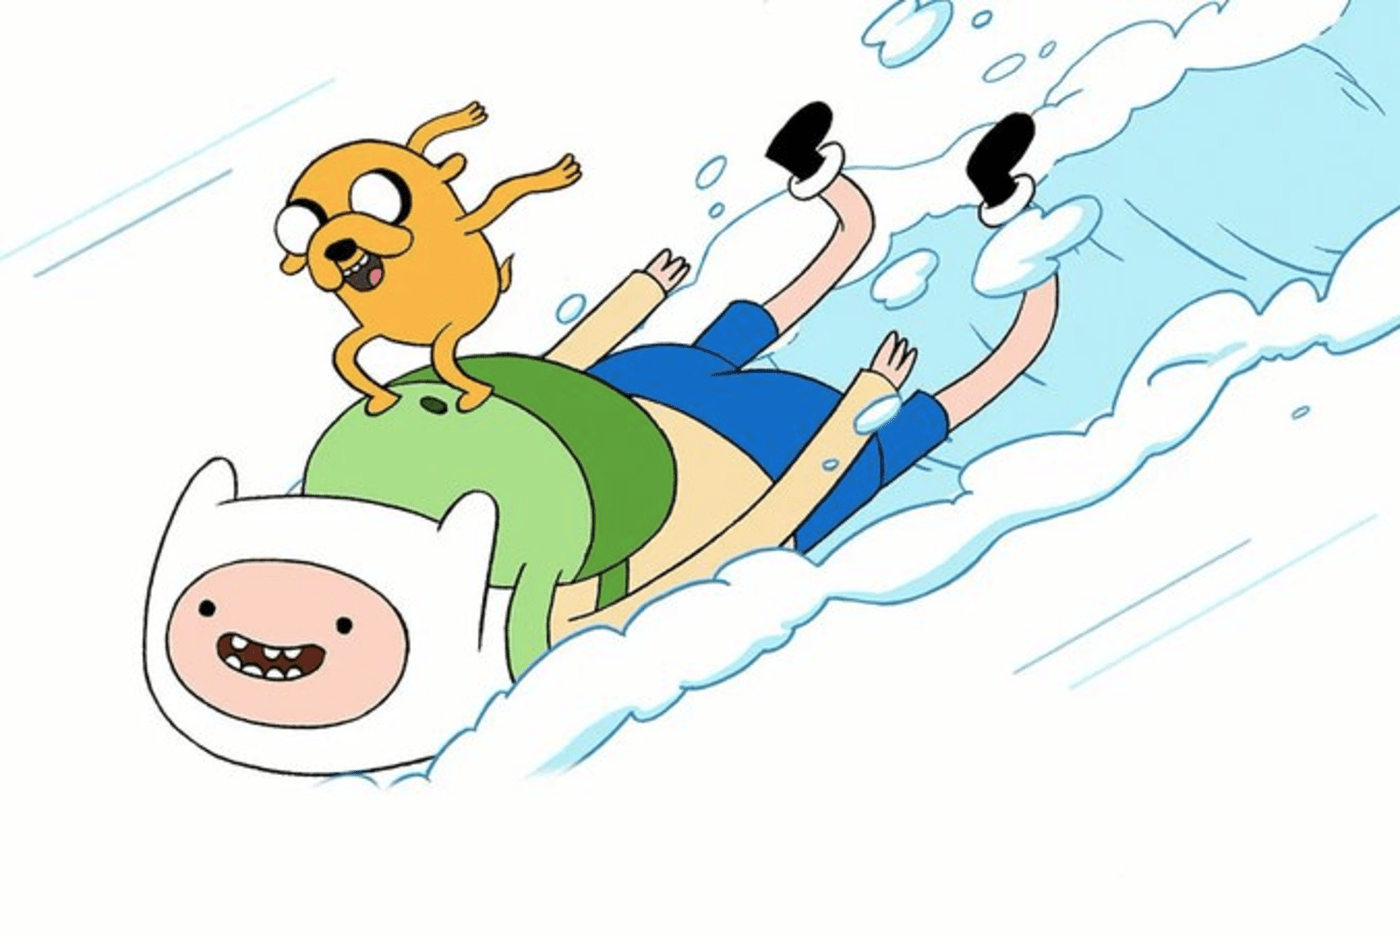 Adventure Time is coming back with a movie and two spinoff series